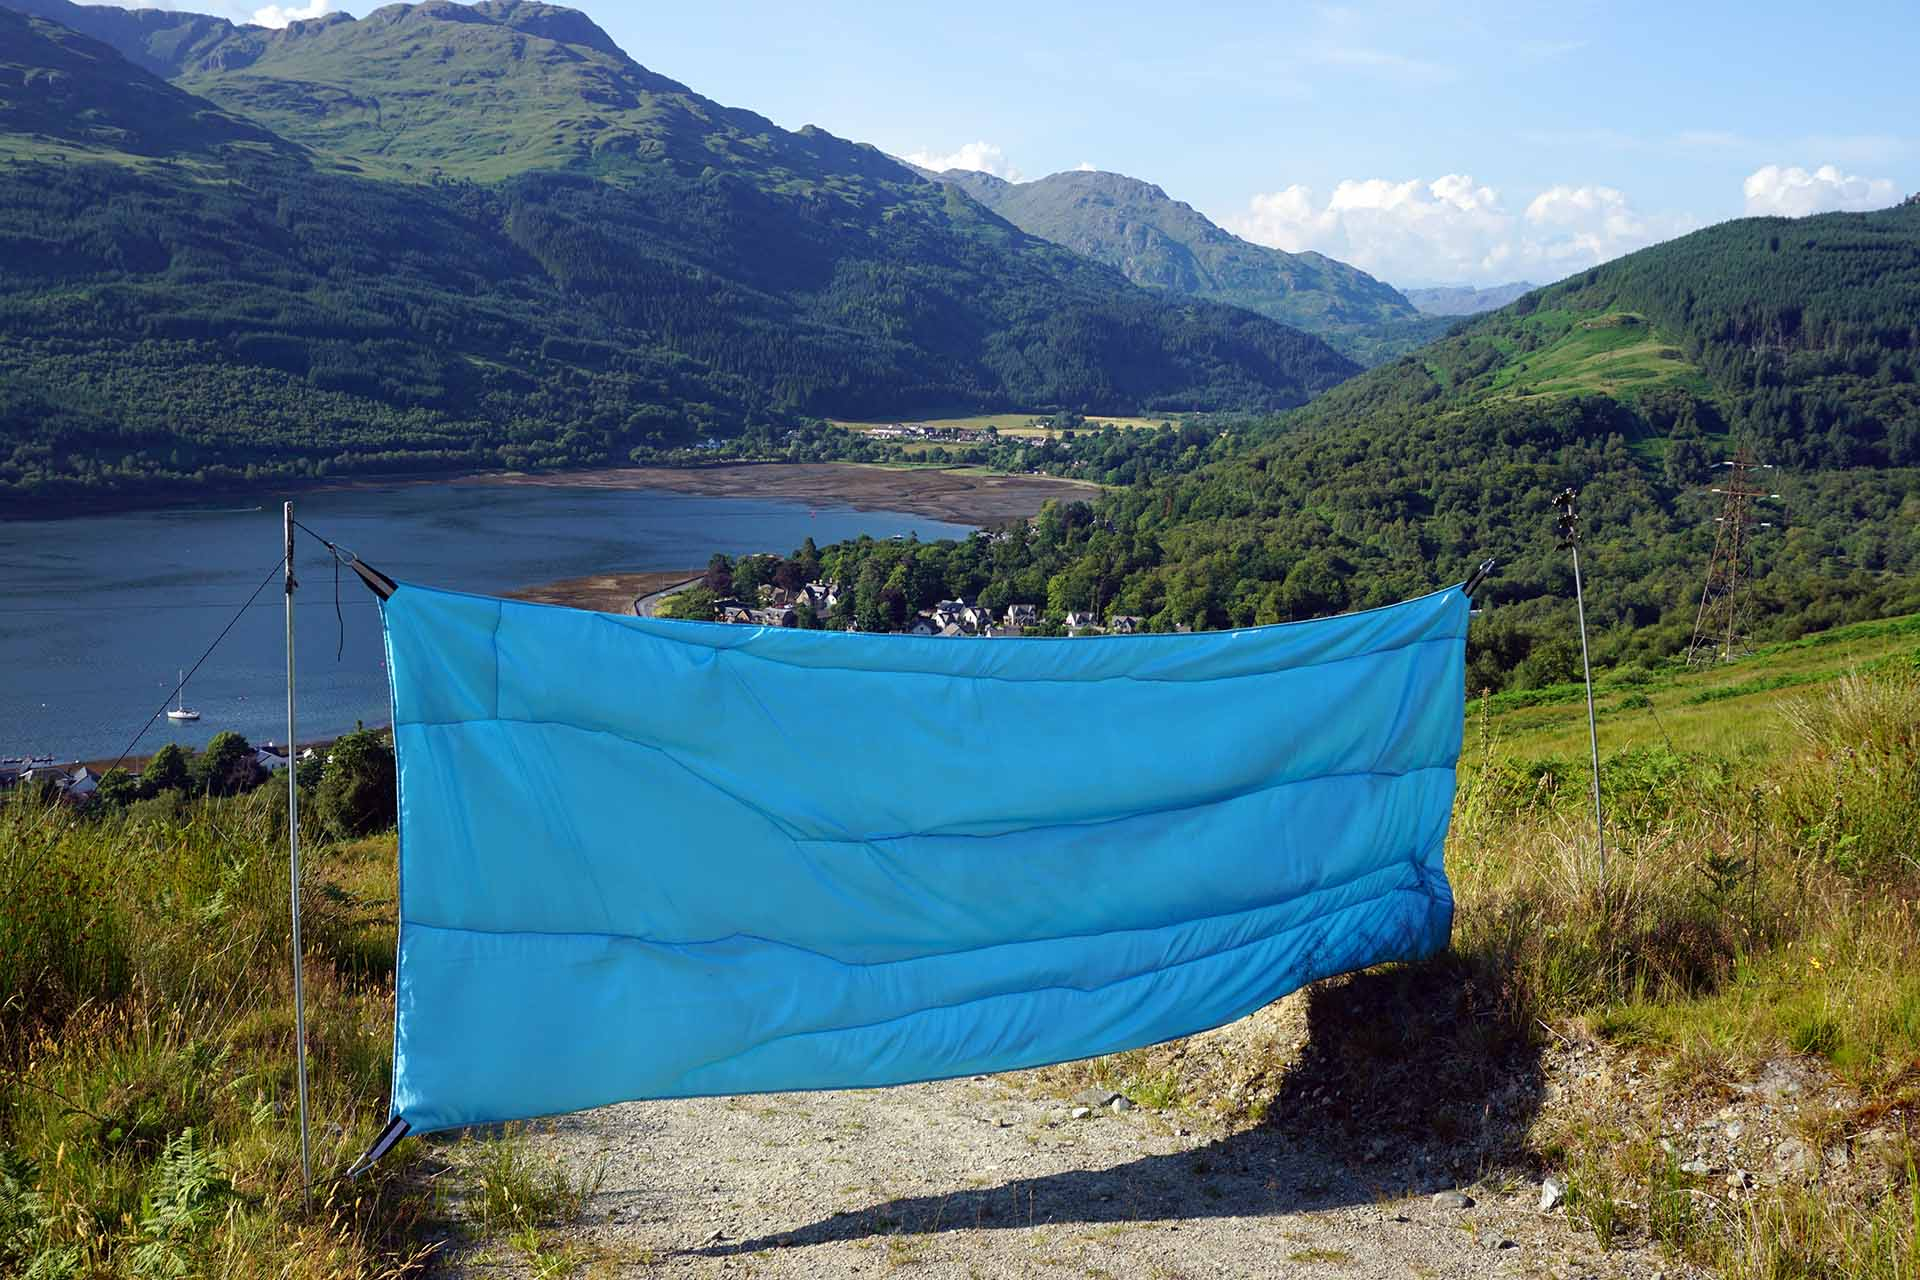 Baby Blue two toned taffeta sheet, obstructing a path over looking Loch Long and the Arrochar Alps